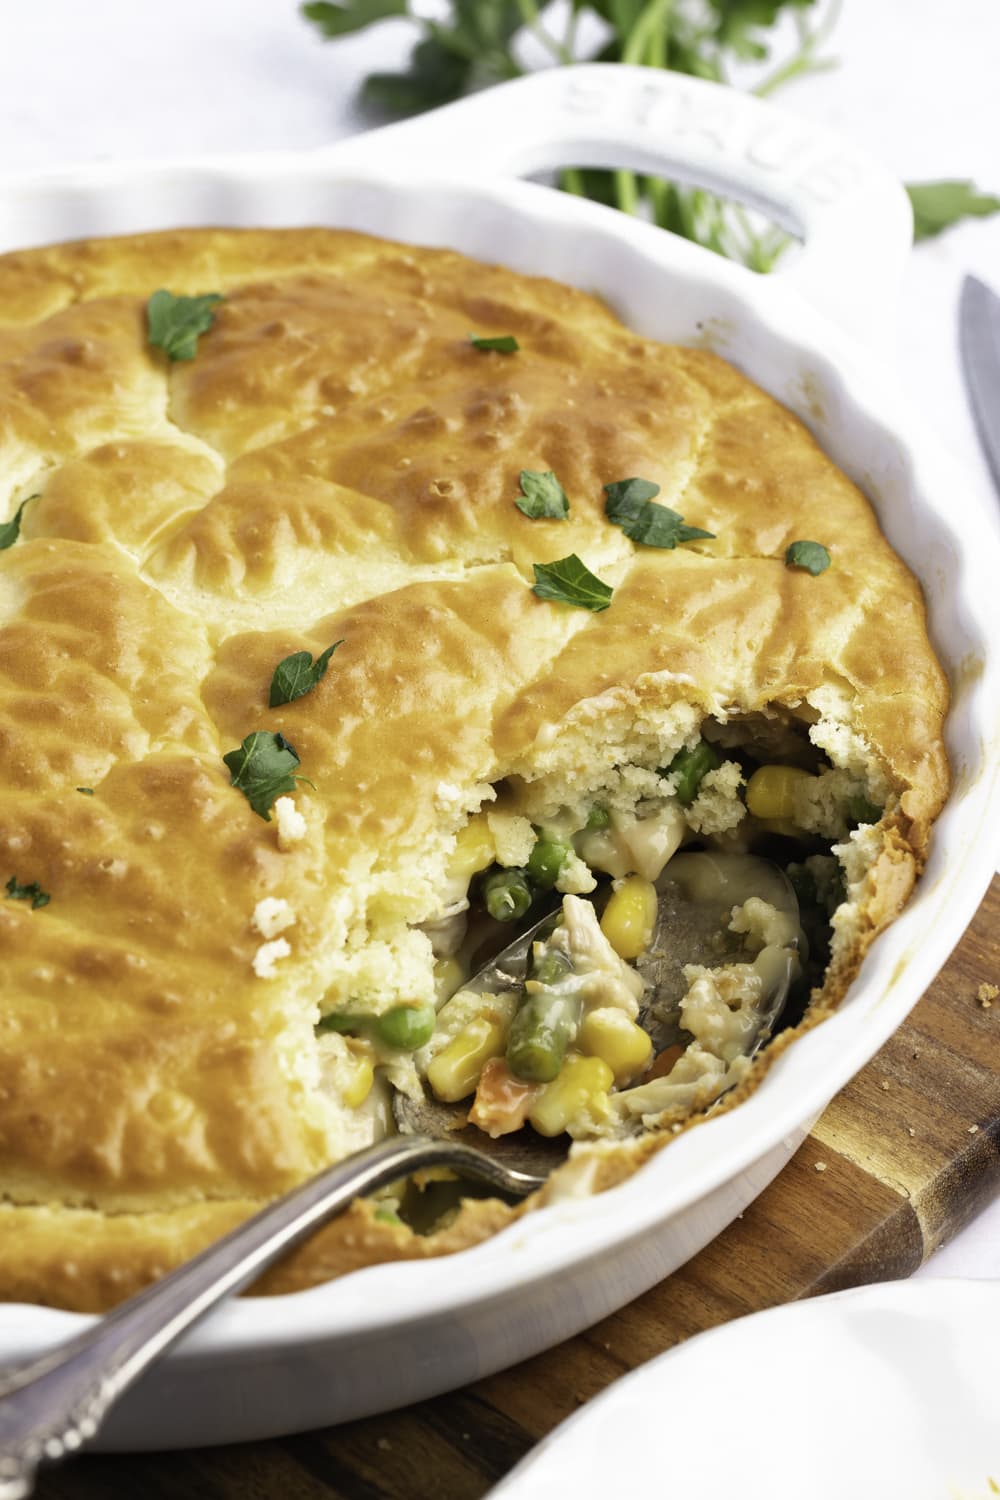 Chicken pot pie in a round casserole dish portion missing showing filling.